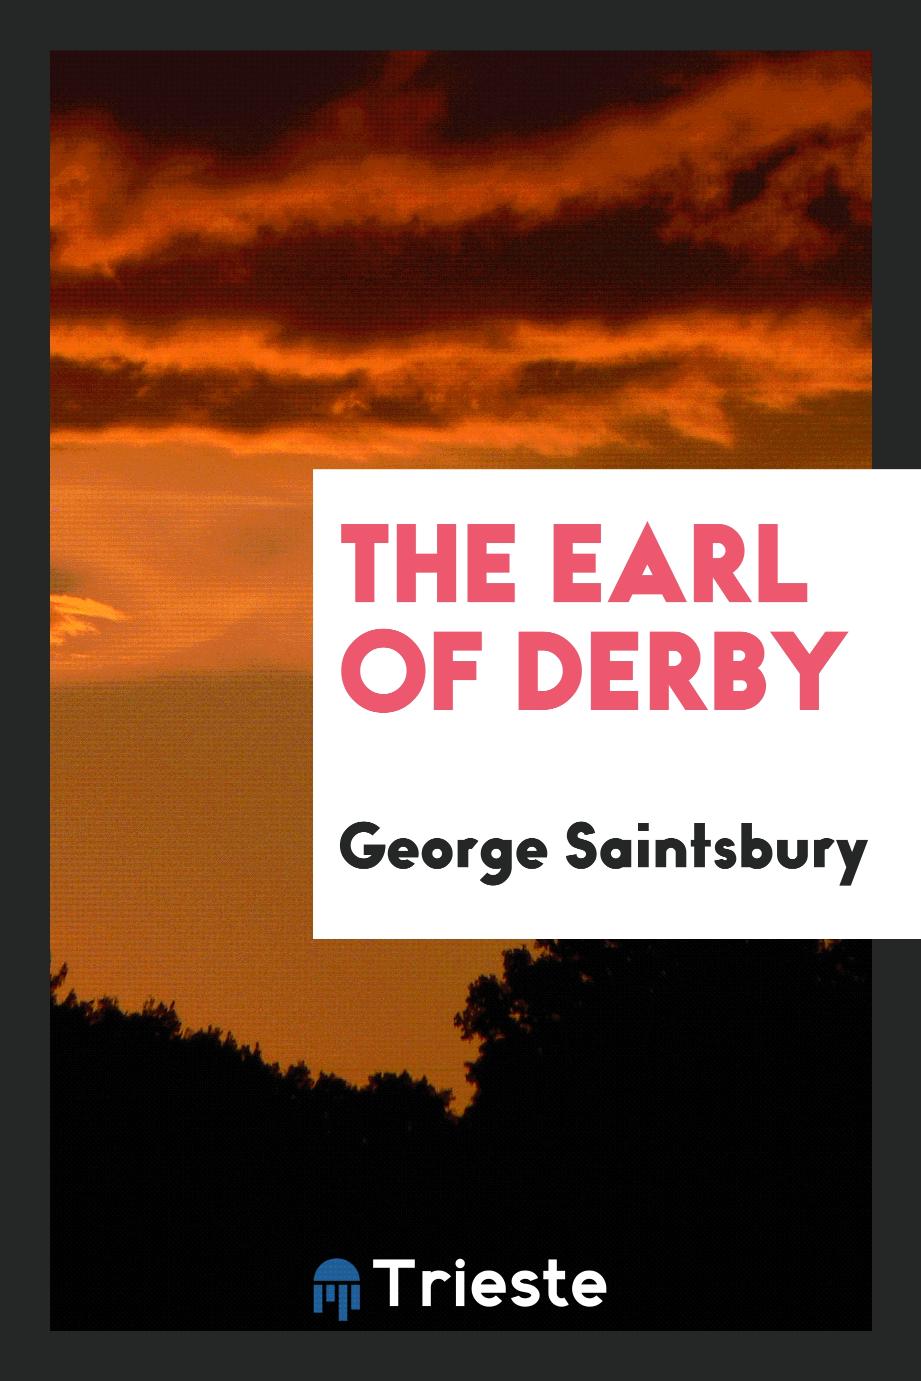 The Earl of Derby